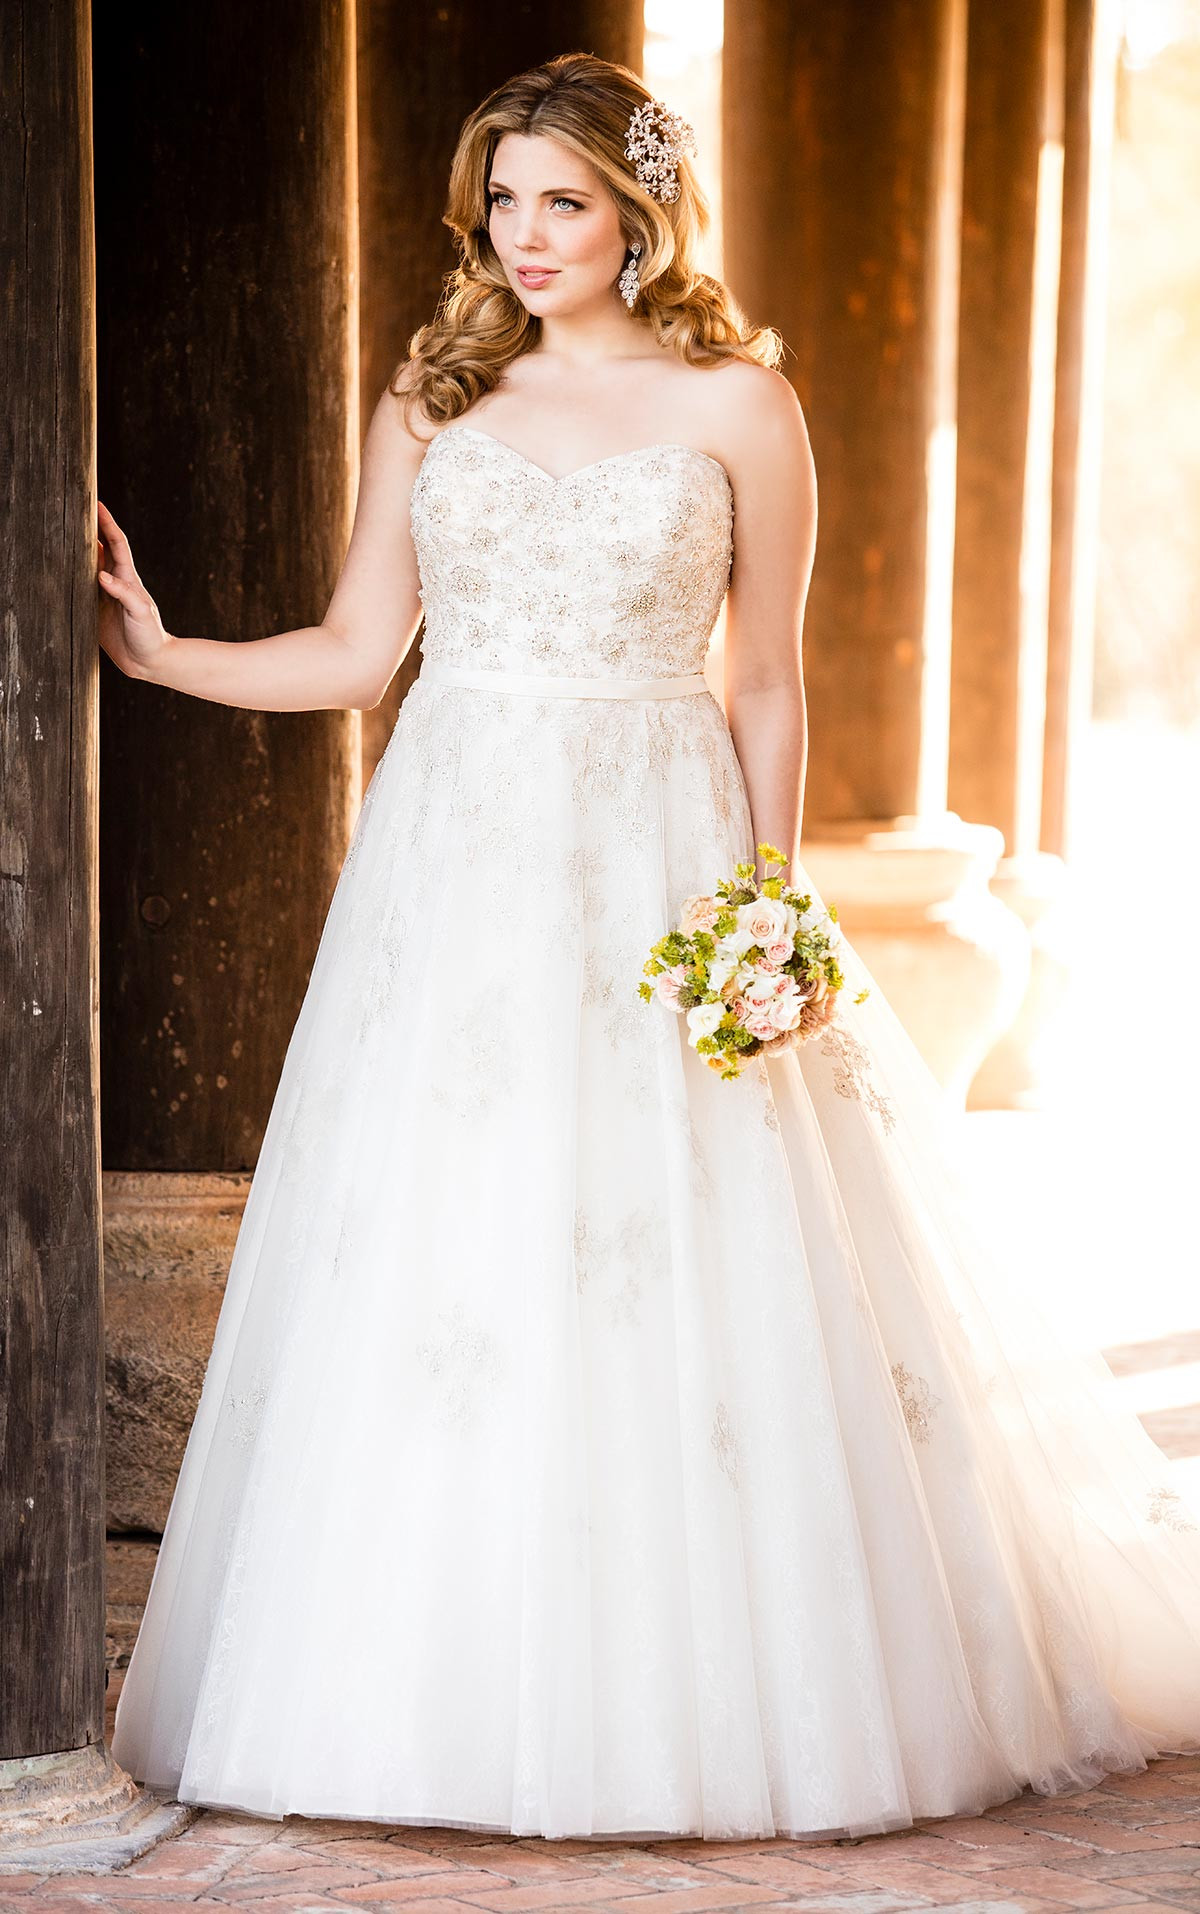 Where To Buy Wedding Dresses
 Silver Lace Plus Size Wedding Dress